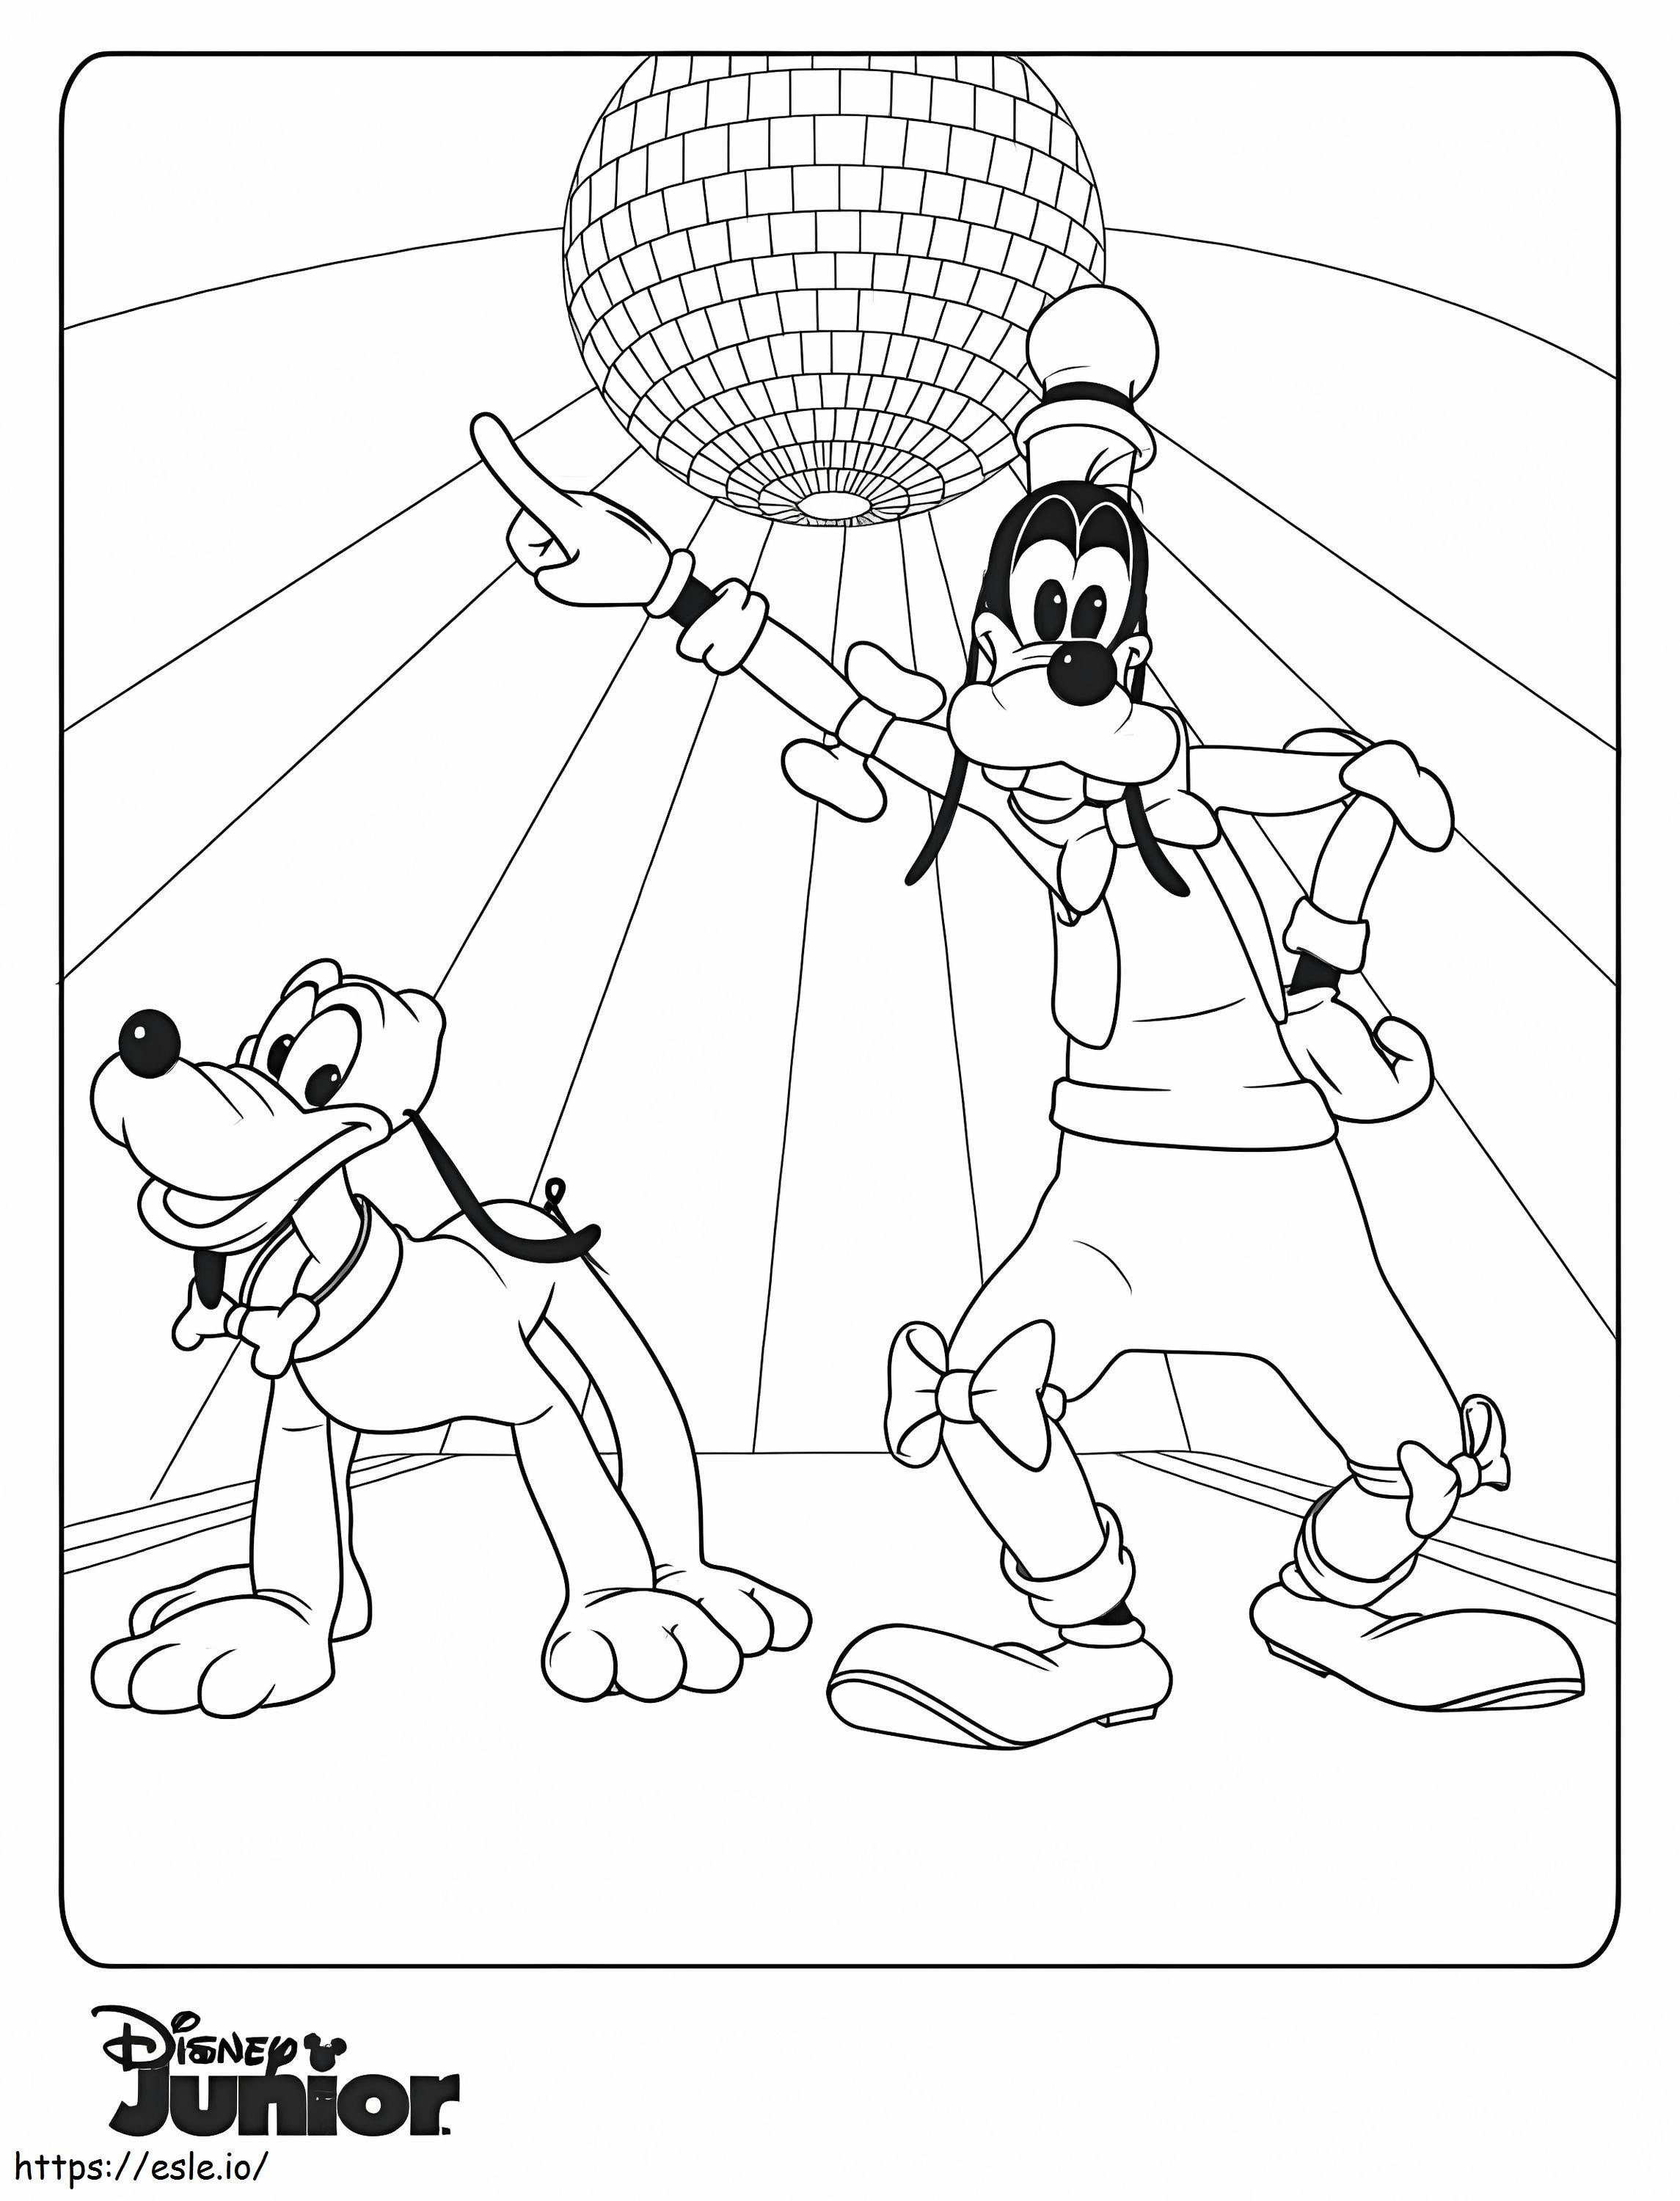 Pluto And Goofy Dancing coloring page